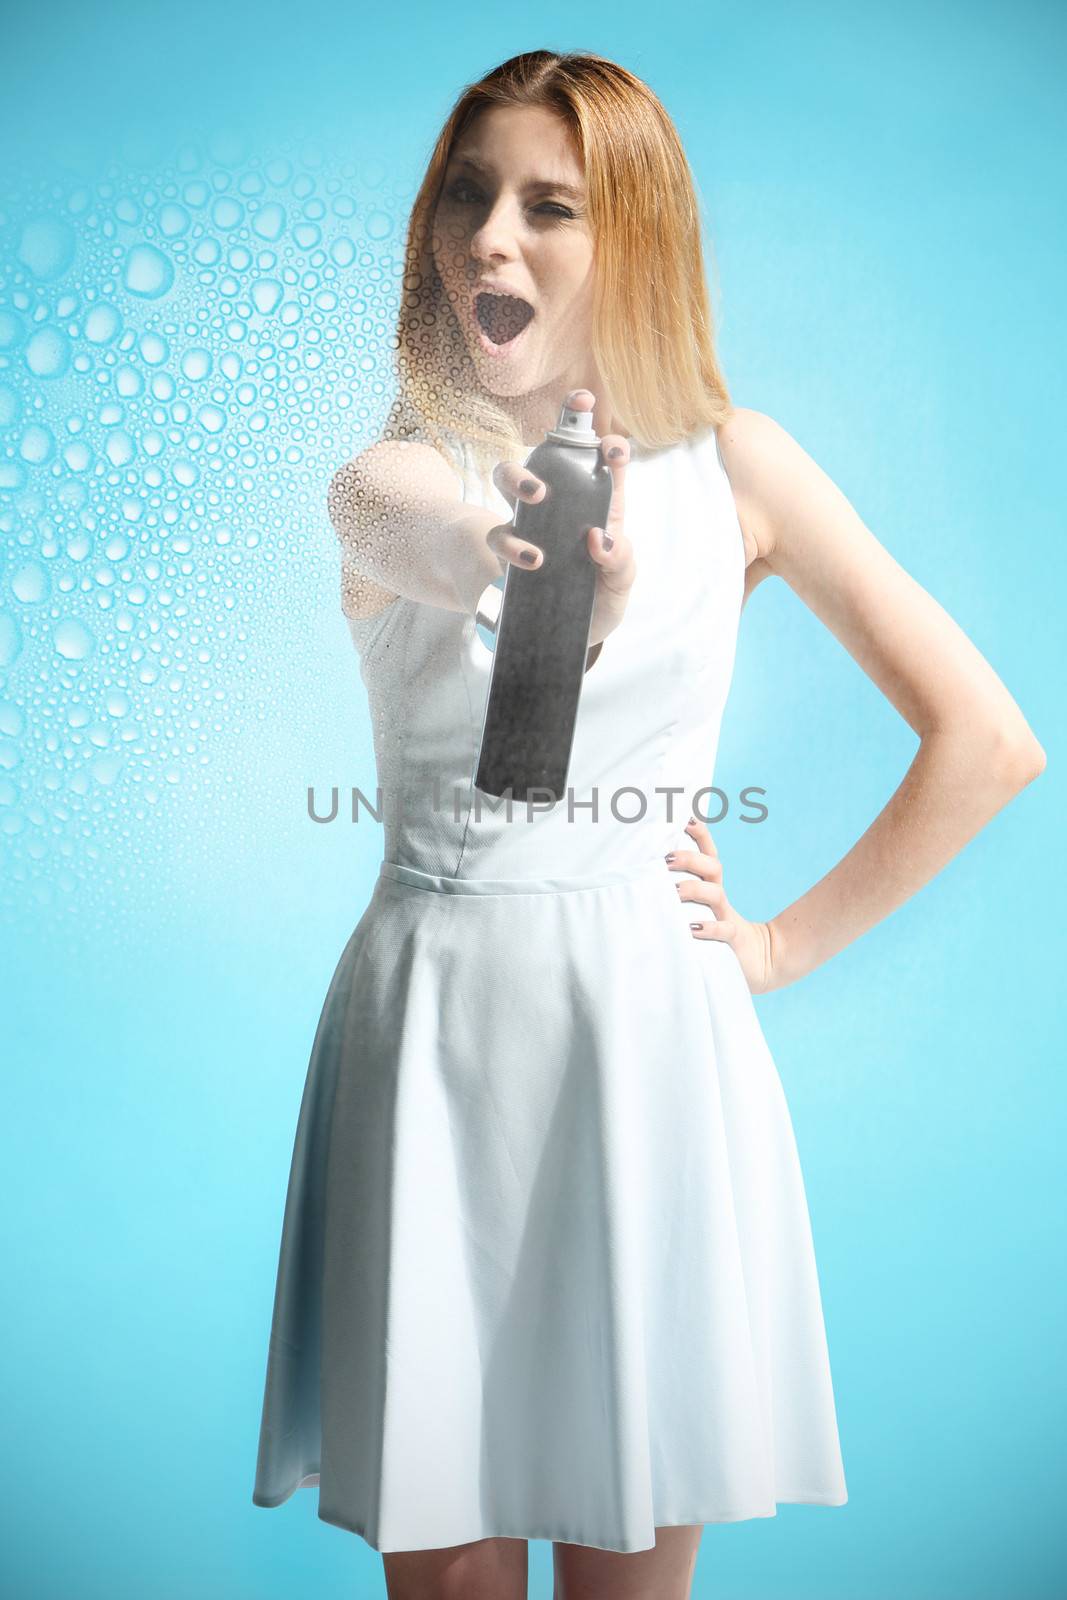 Beautiful girl in a white dress holding a bottle with hairspray by robert_przybysz